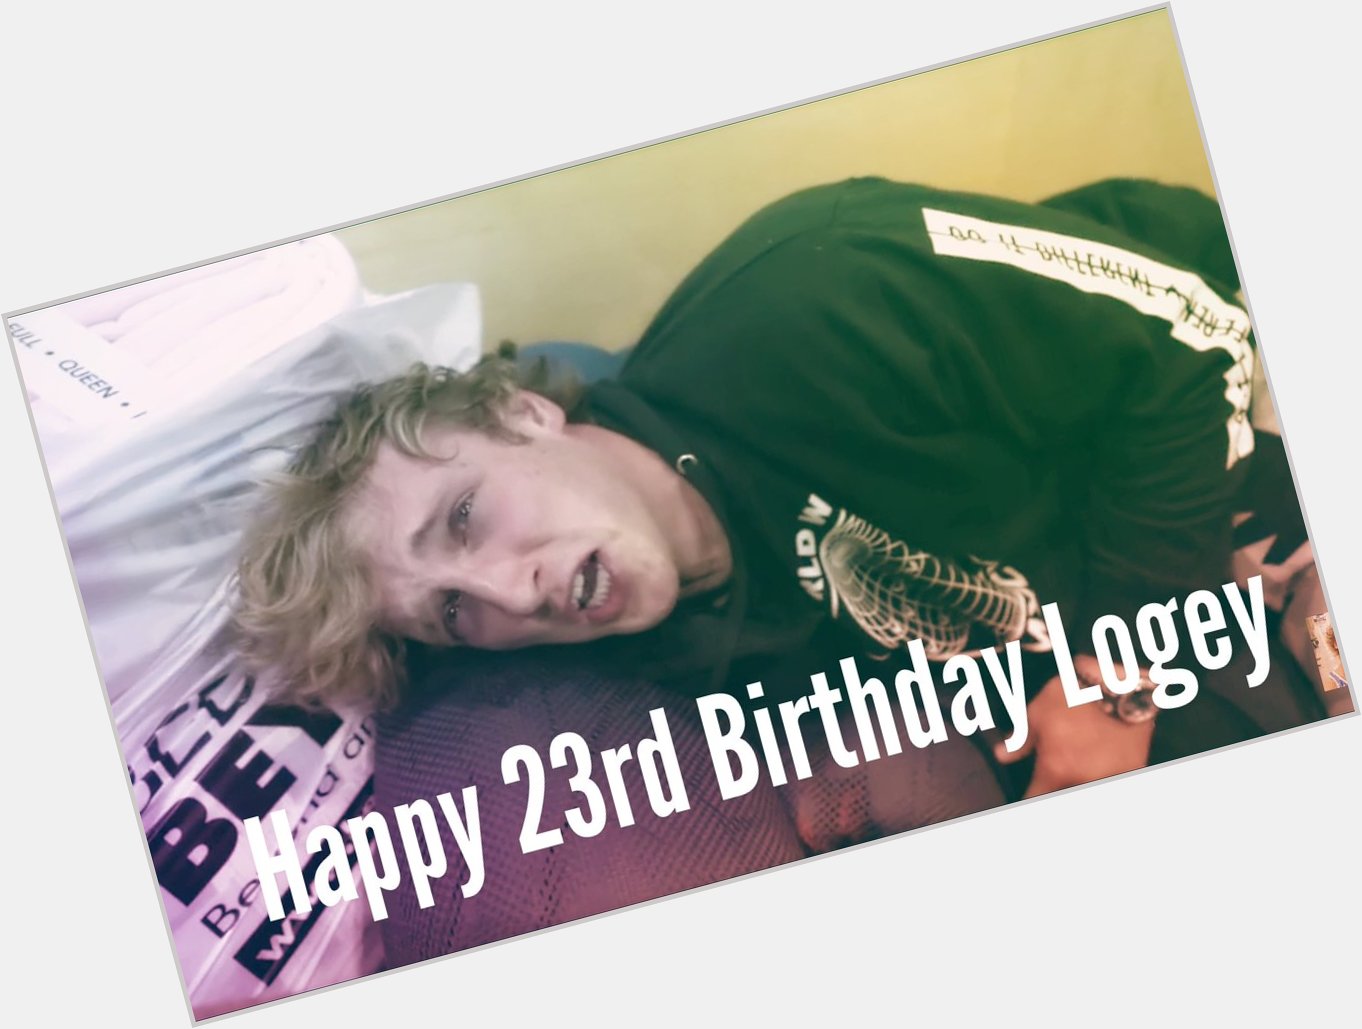 Happy 23rd birthday to the one and only logan paul!! Hope u have a great birthday!! Party hard dude 